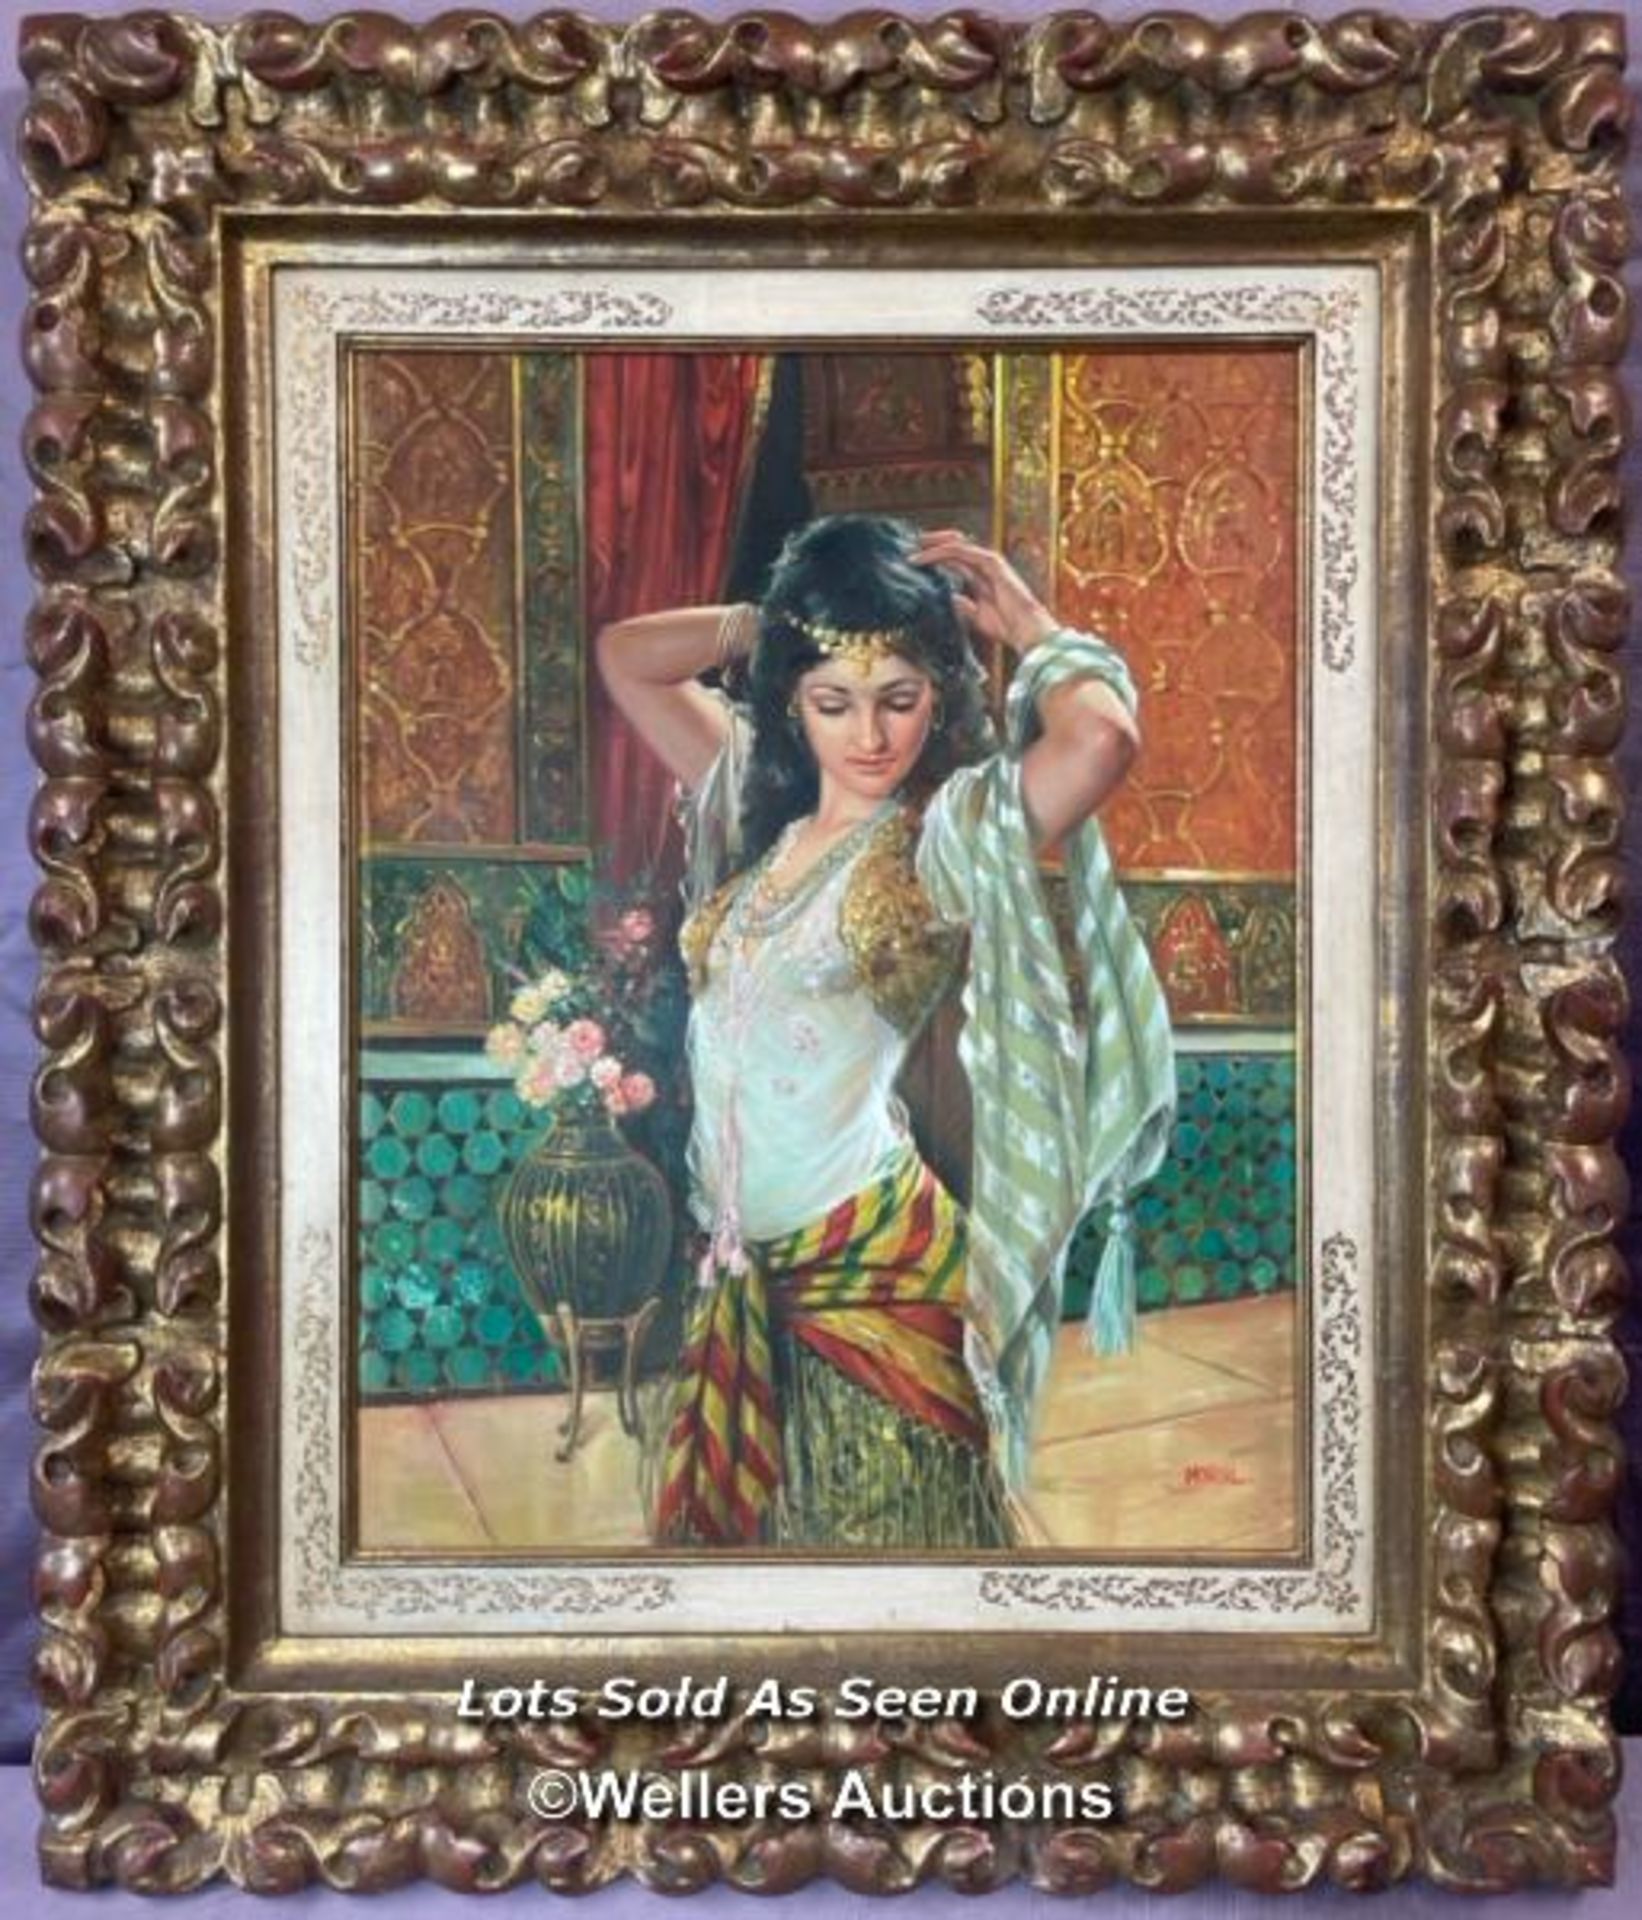 OIL ON CANVAS PAINTING OF AN ARABIAN LADY, BY MORAL, IN A DECORATIVE GILT FRAME, 47 X 60CM